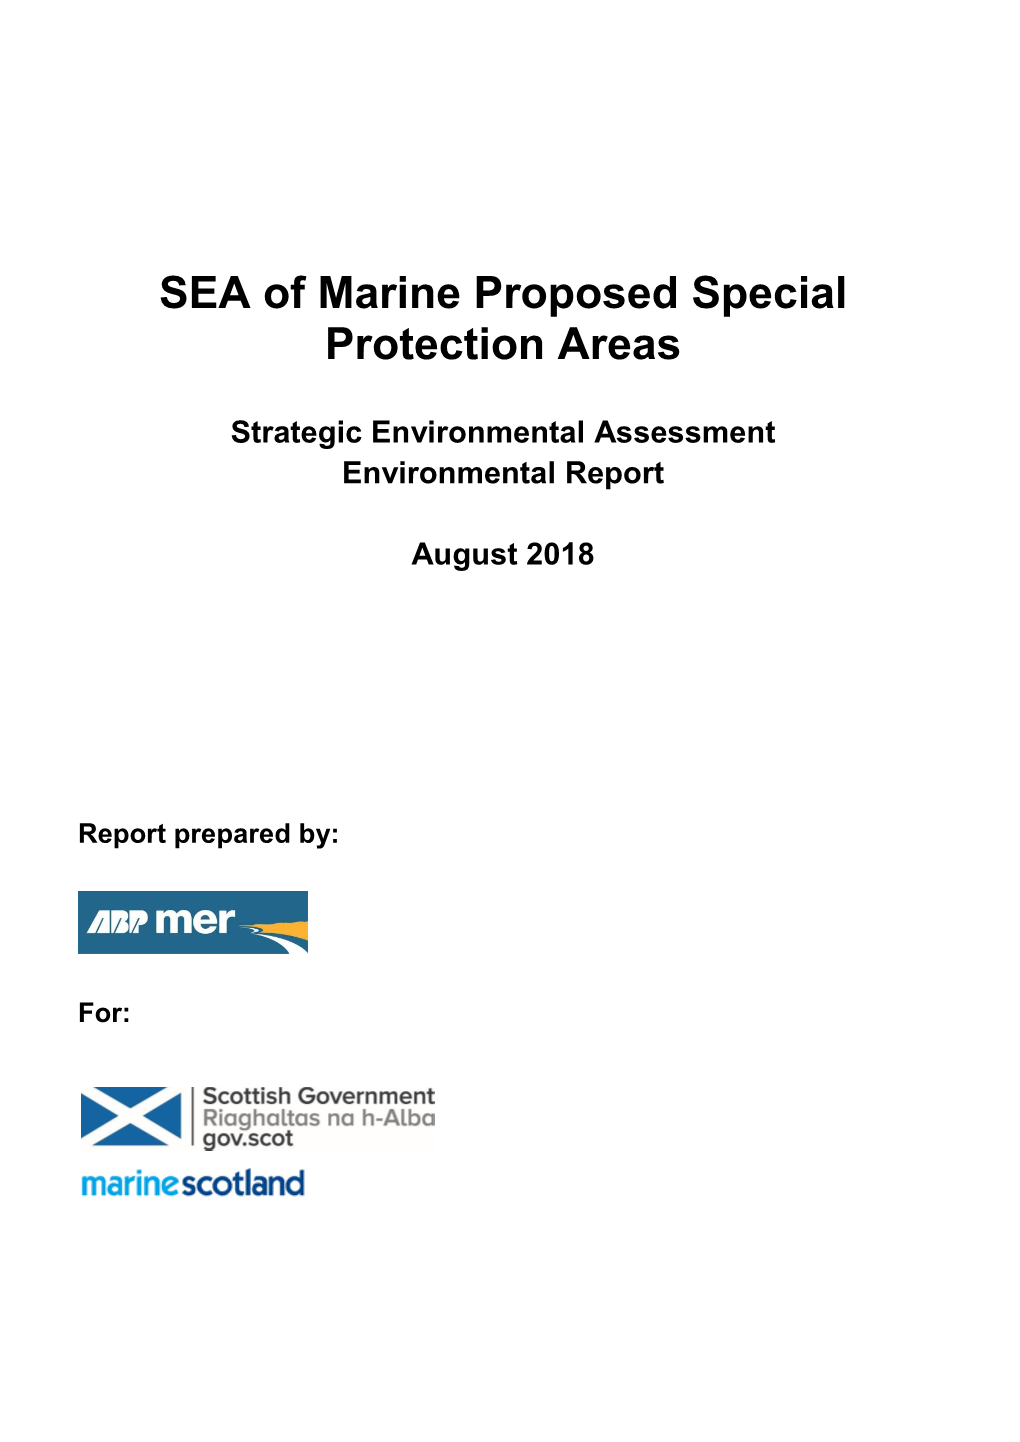 SEA of Marine Proposed Special Protection Areas